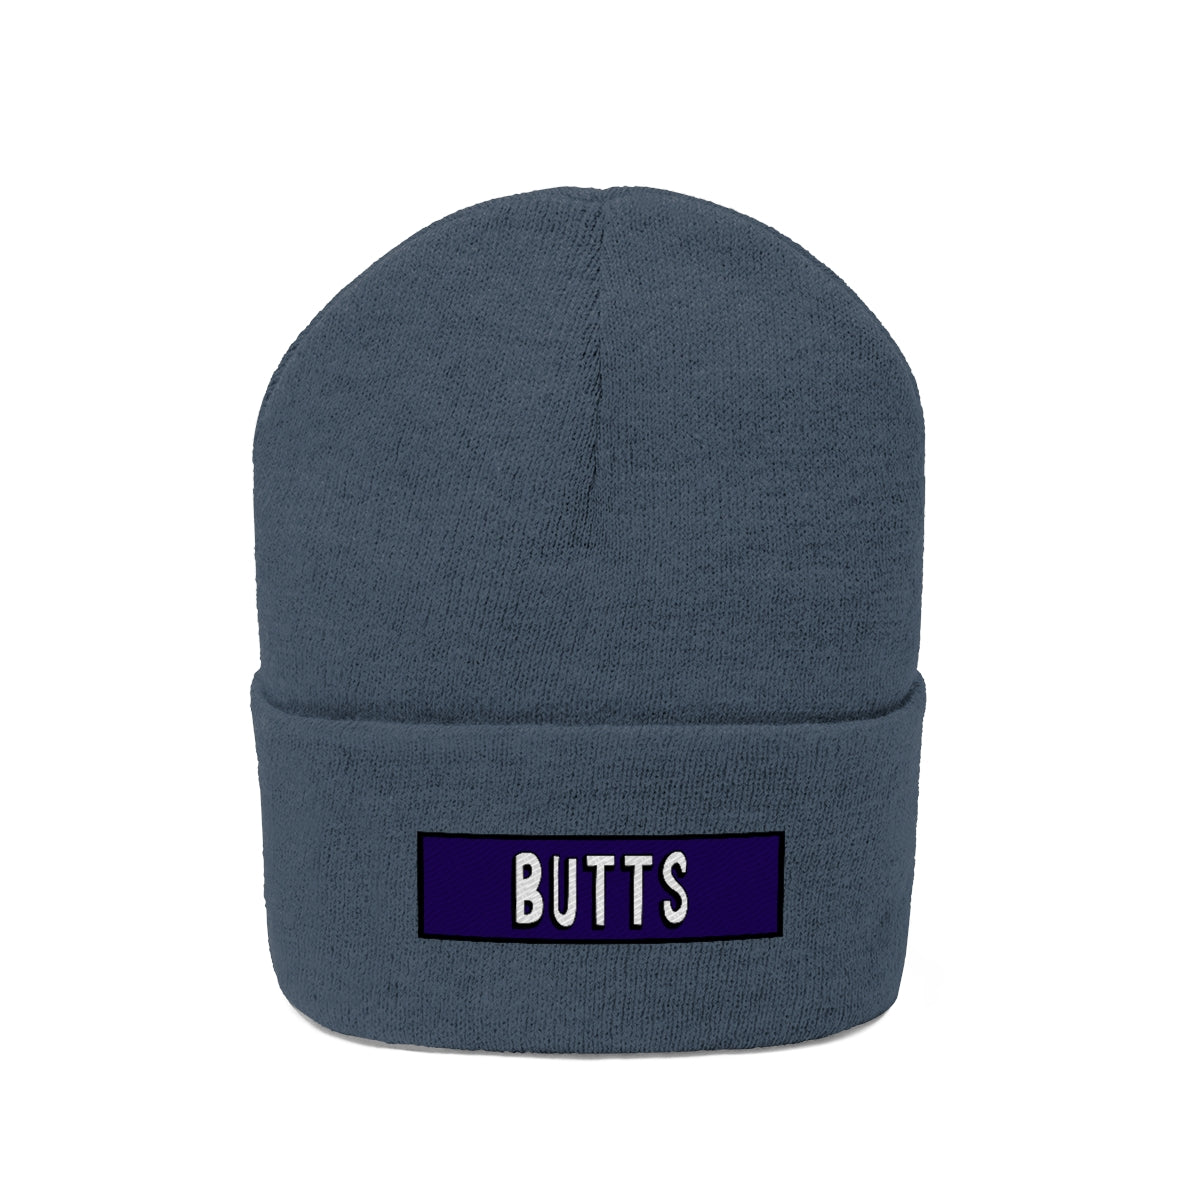 Butts Embroidered Beanie - Just Like Bob Bob's Burgers